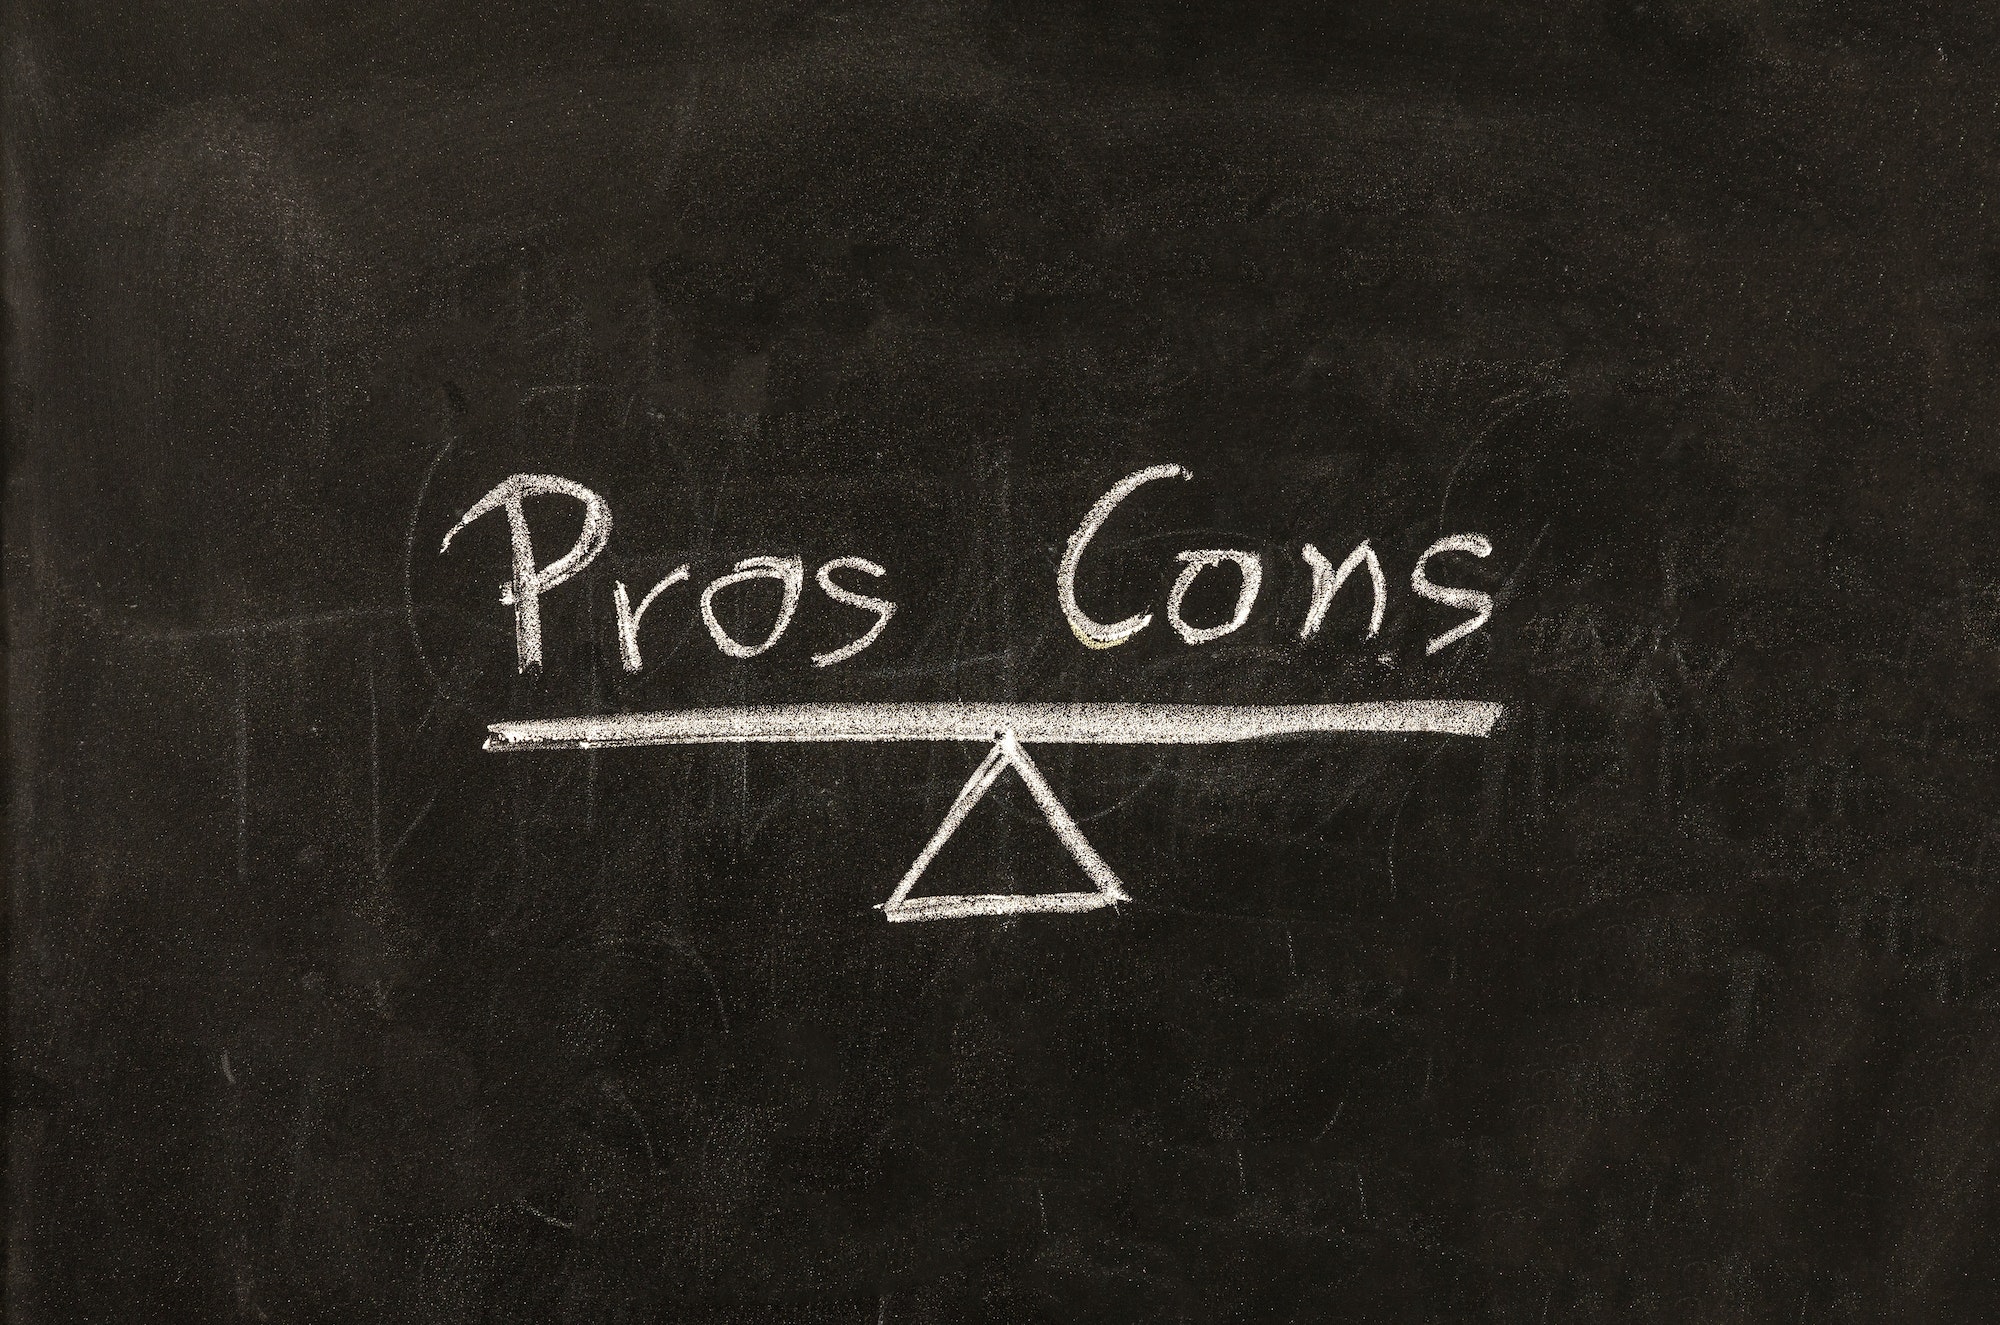 Pros contra cons concept. Empty list on blackboard background, for decision making..